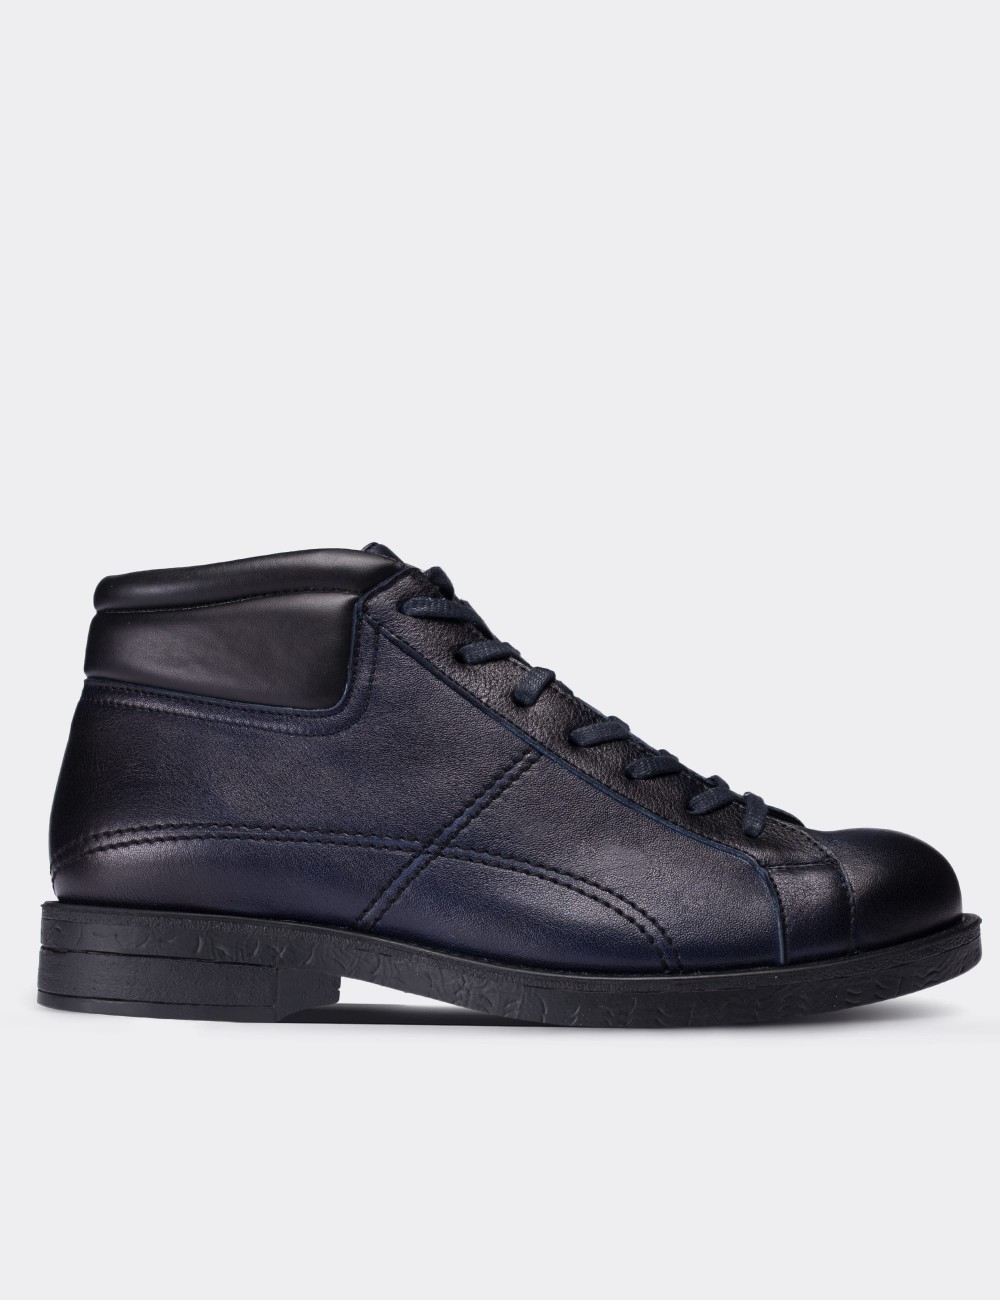 Navy  Leather  Boots - 01760MLCVC02